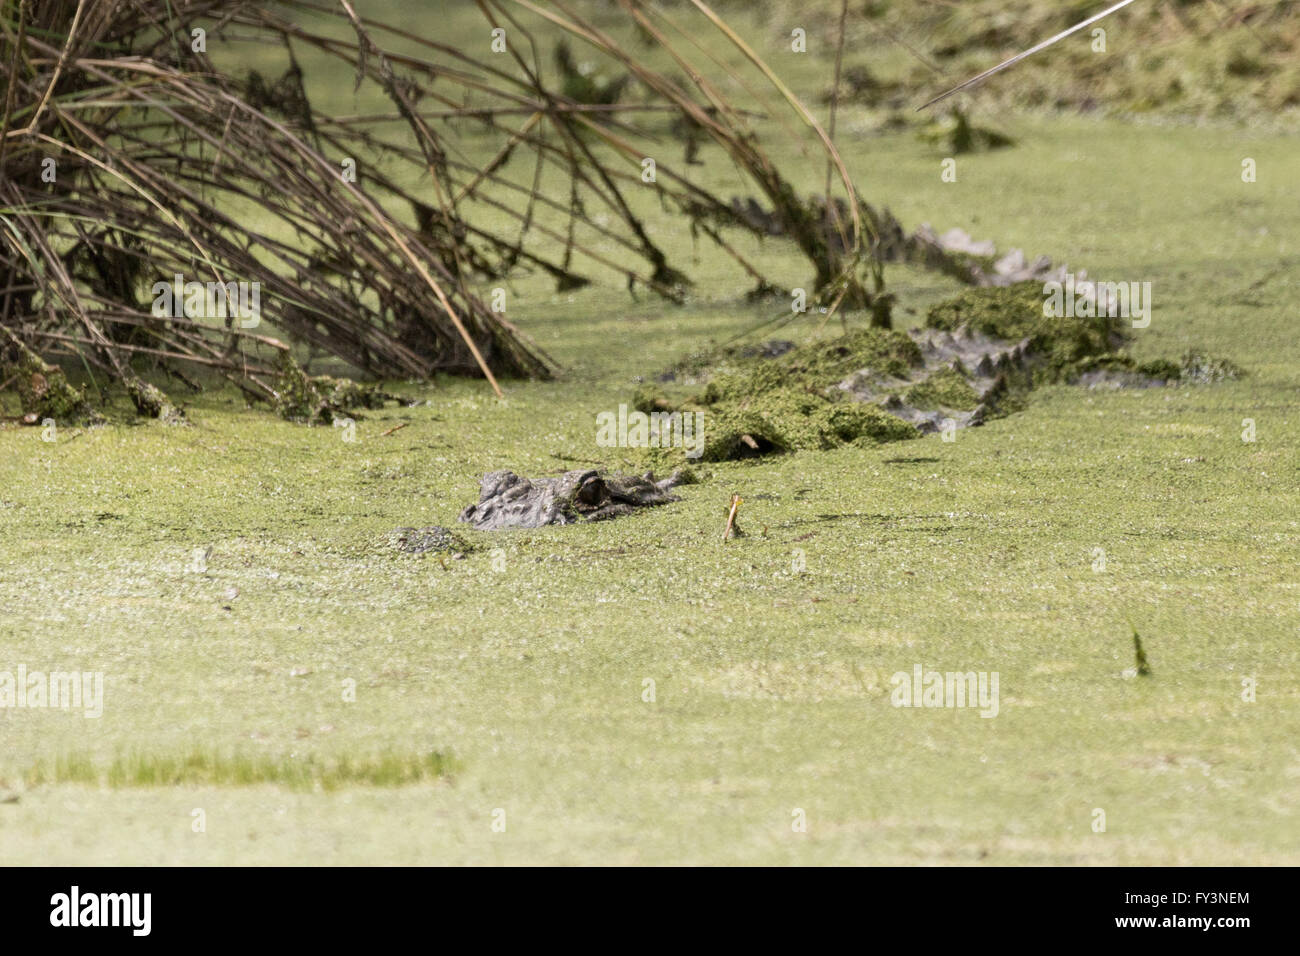 An American alligator hides in duckweed along a waterway in the Donnelley Wildlife Management Area April 20, 2016 in Green Pond, South Carolina. The preservation is part of the larger ACE Basin nature refugee, one of the largest undeveloped estuaries along the Atlantic Coast of the United States. Stock Photo